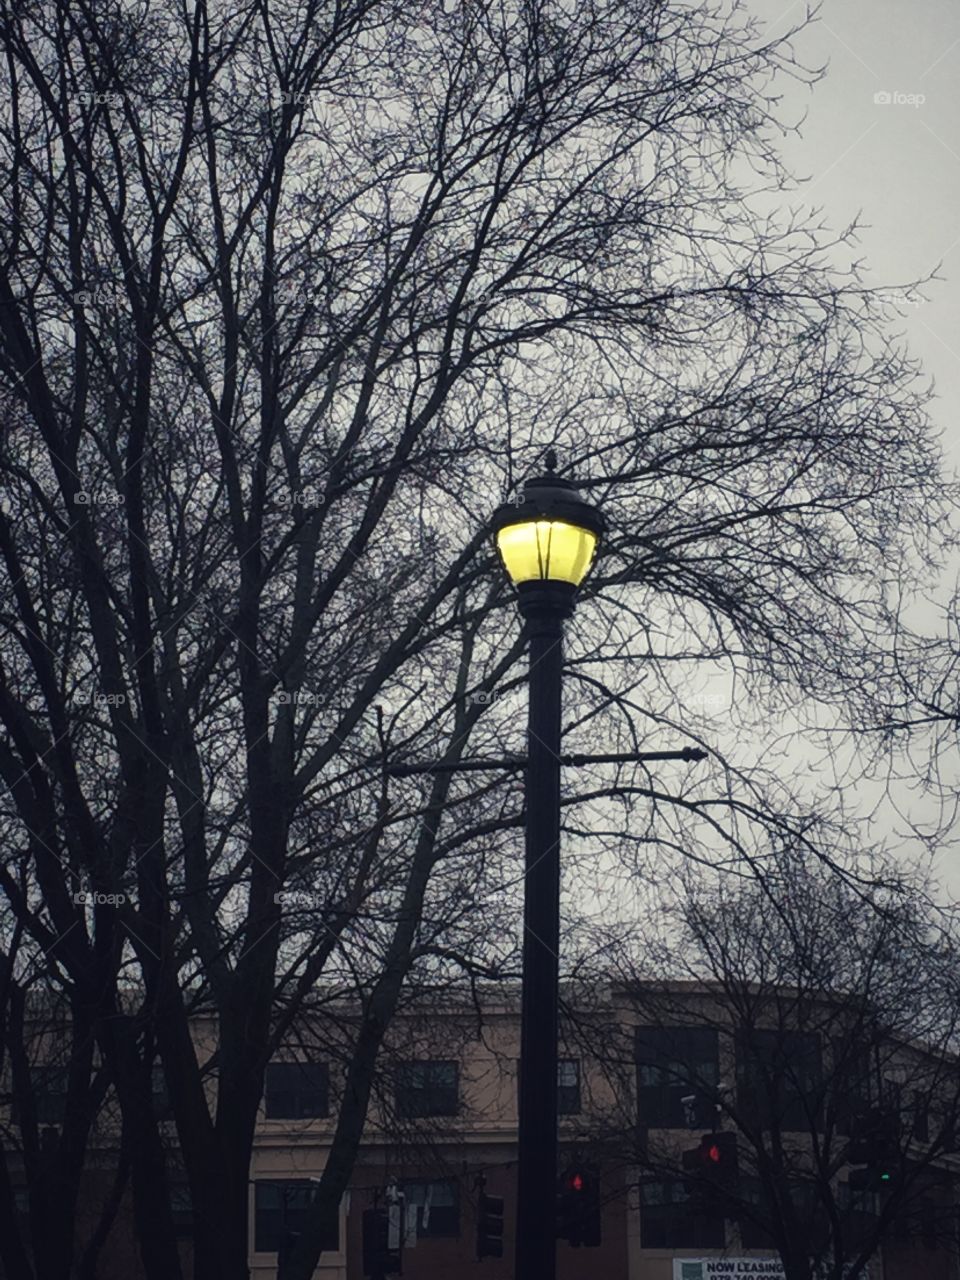 A lamp post sits in front of a leafless tree in the morning of a winters day. The lamp glows yellow. It is the most colorful thing in the picture.